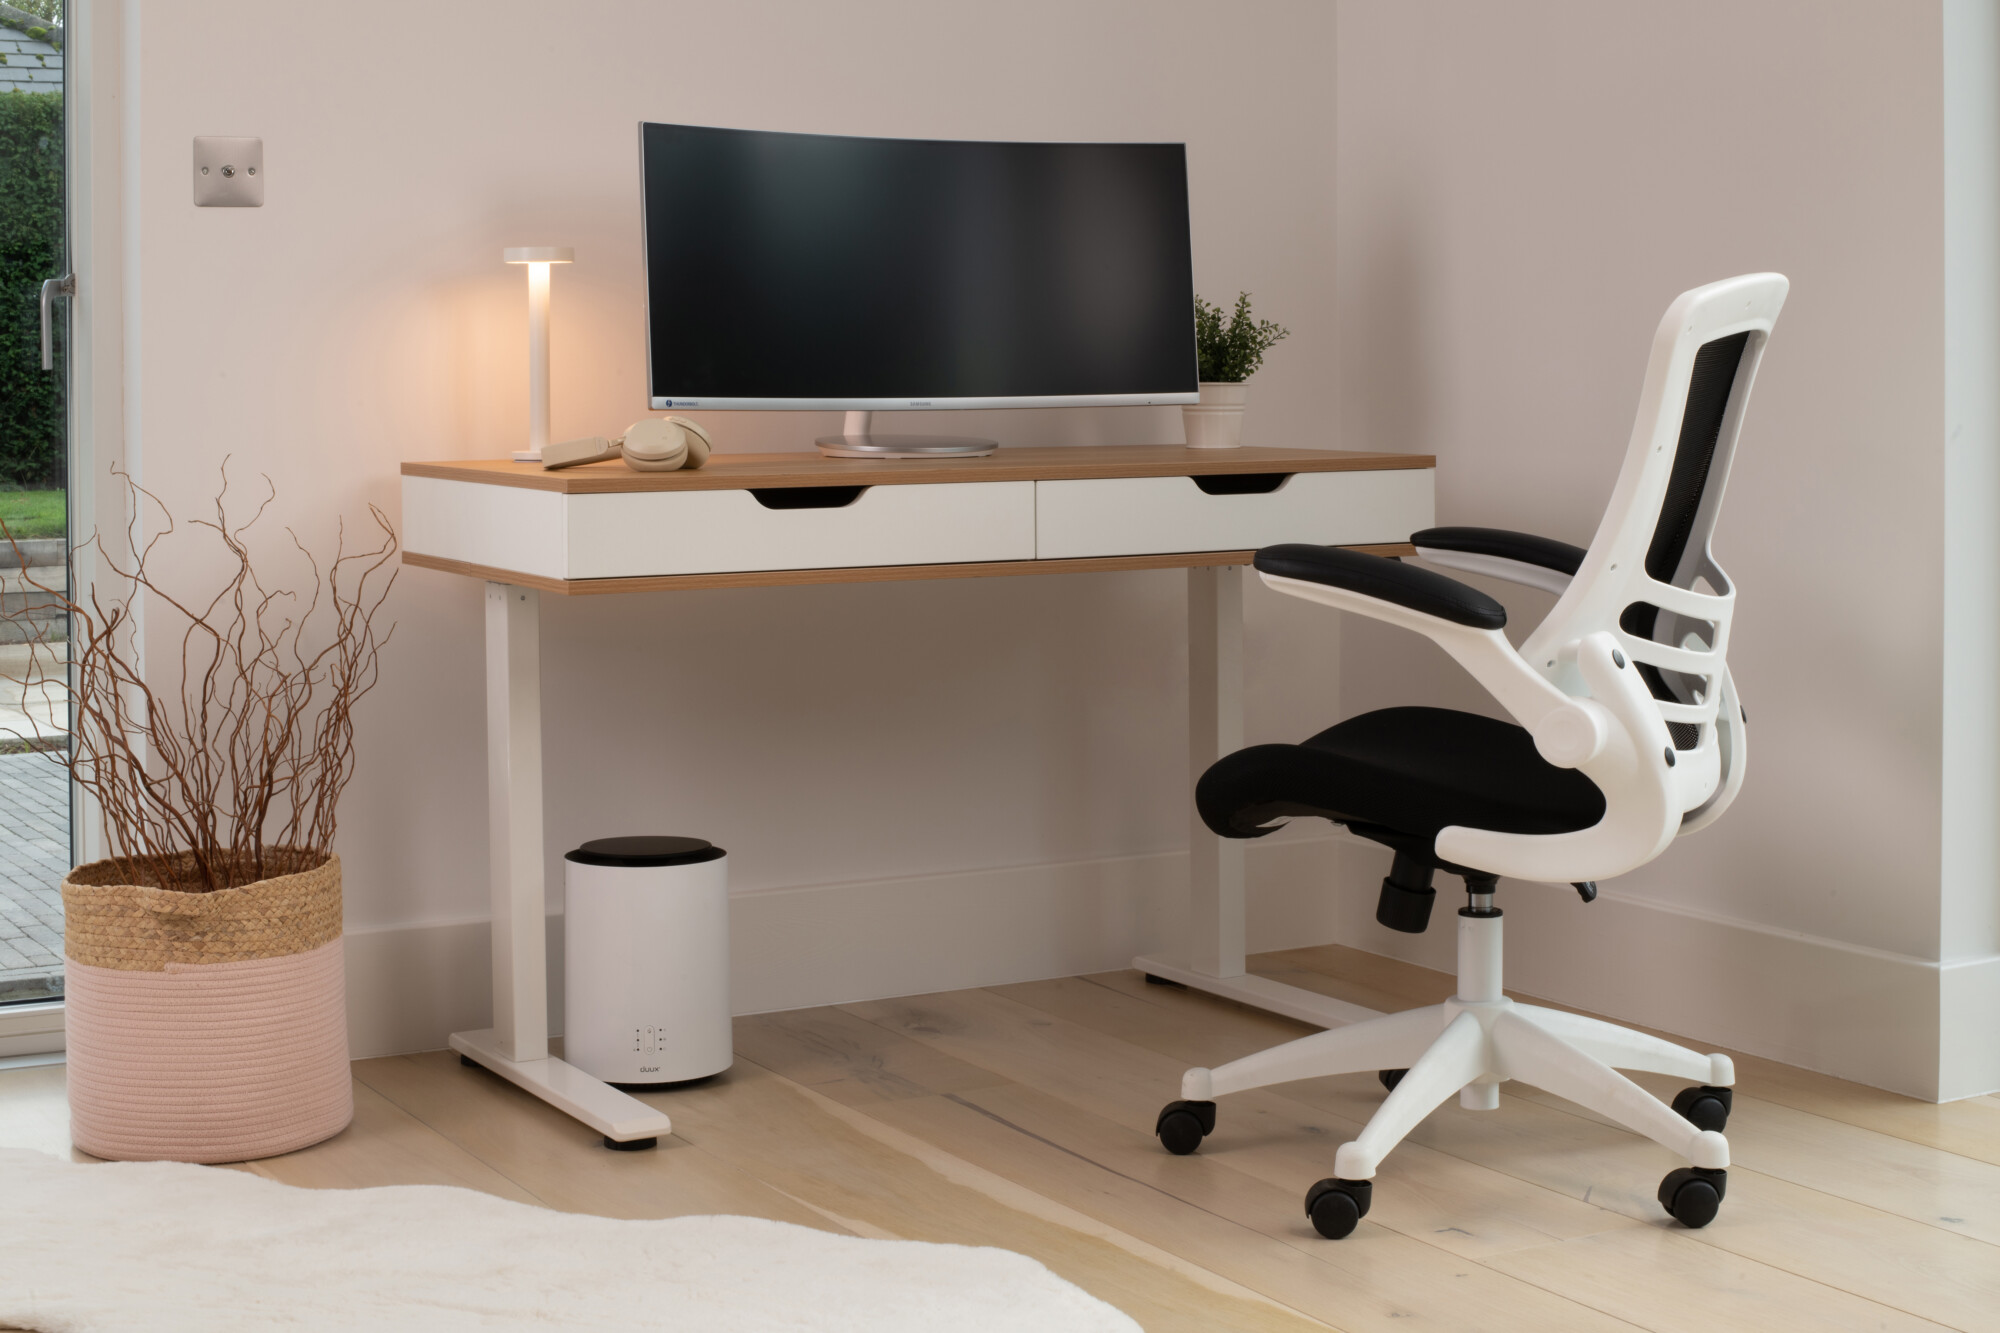 The Ola Height Adjustable Desk With Drawers from Koble Designs, a stylish and modern design that combines maple wood and classic white to create an elegant piece of furniture for your home’s aesthetic. Having a height adjustable desk can provide many benefits to both your physical and mental health when working from home. 